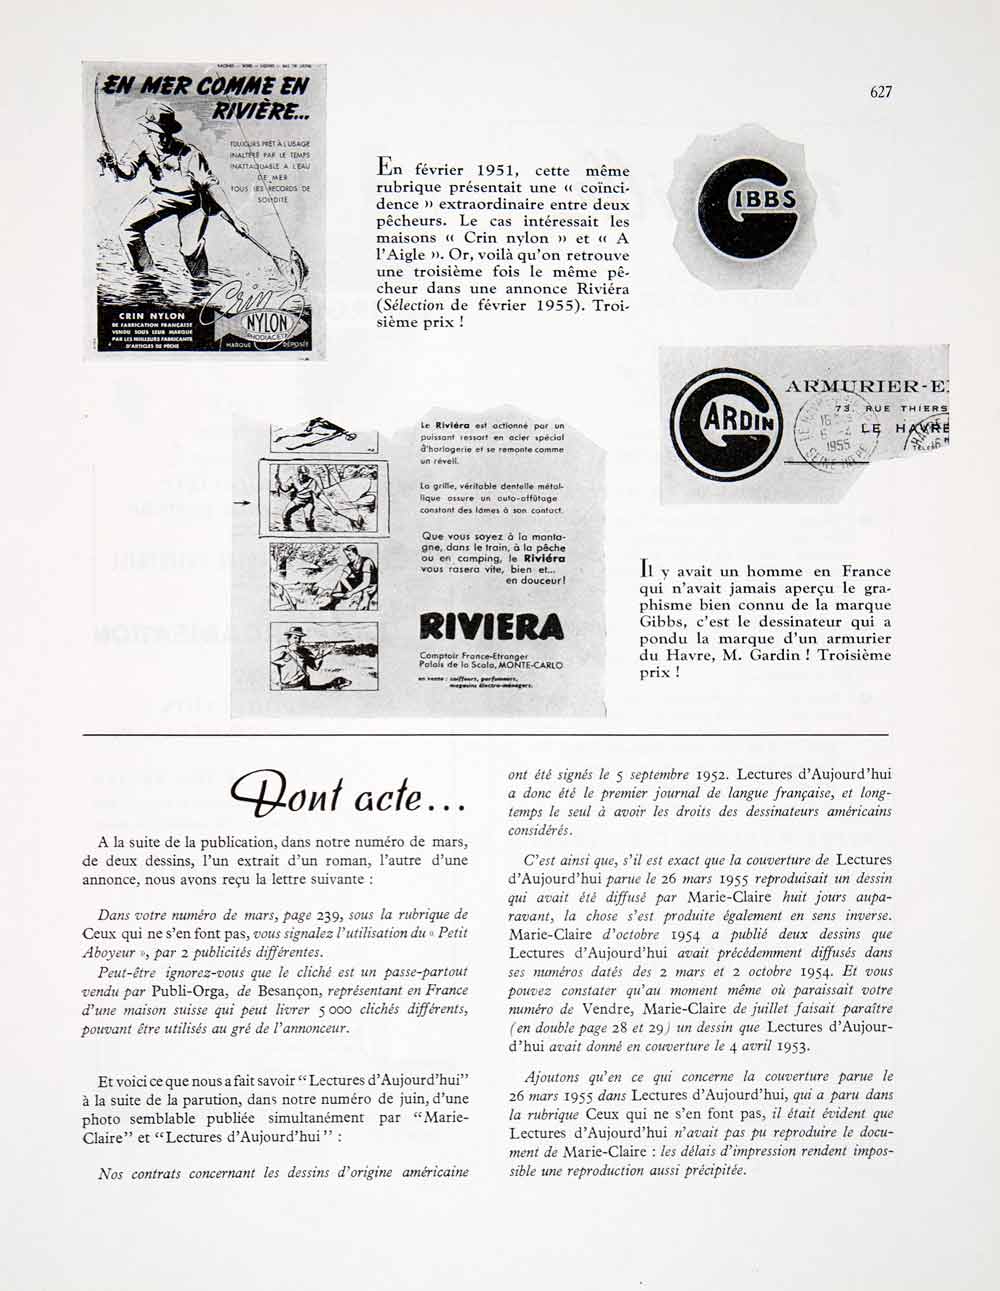 1955 Article Plagiarism French Advertising Paul Nicolas Willy Ronis Adel VEN7